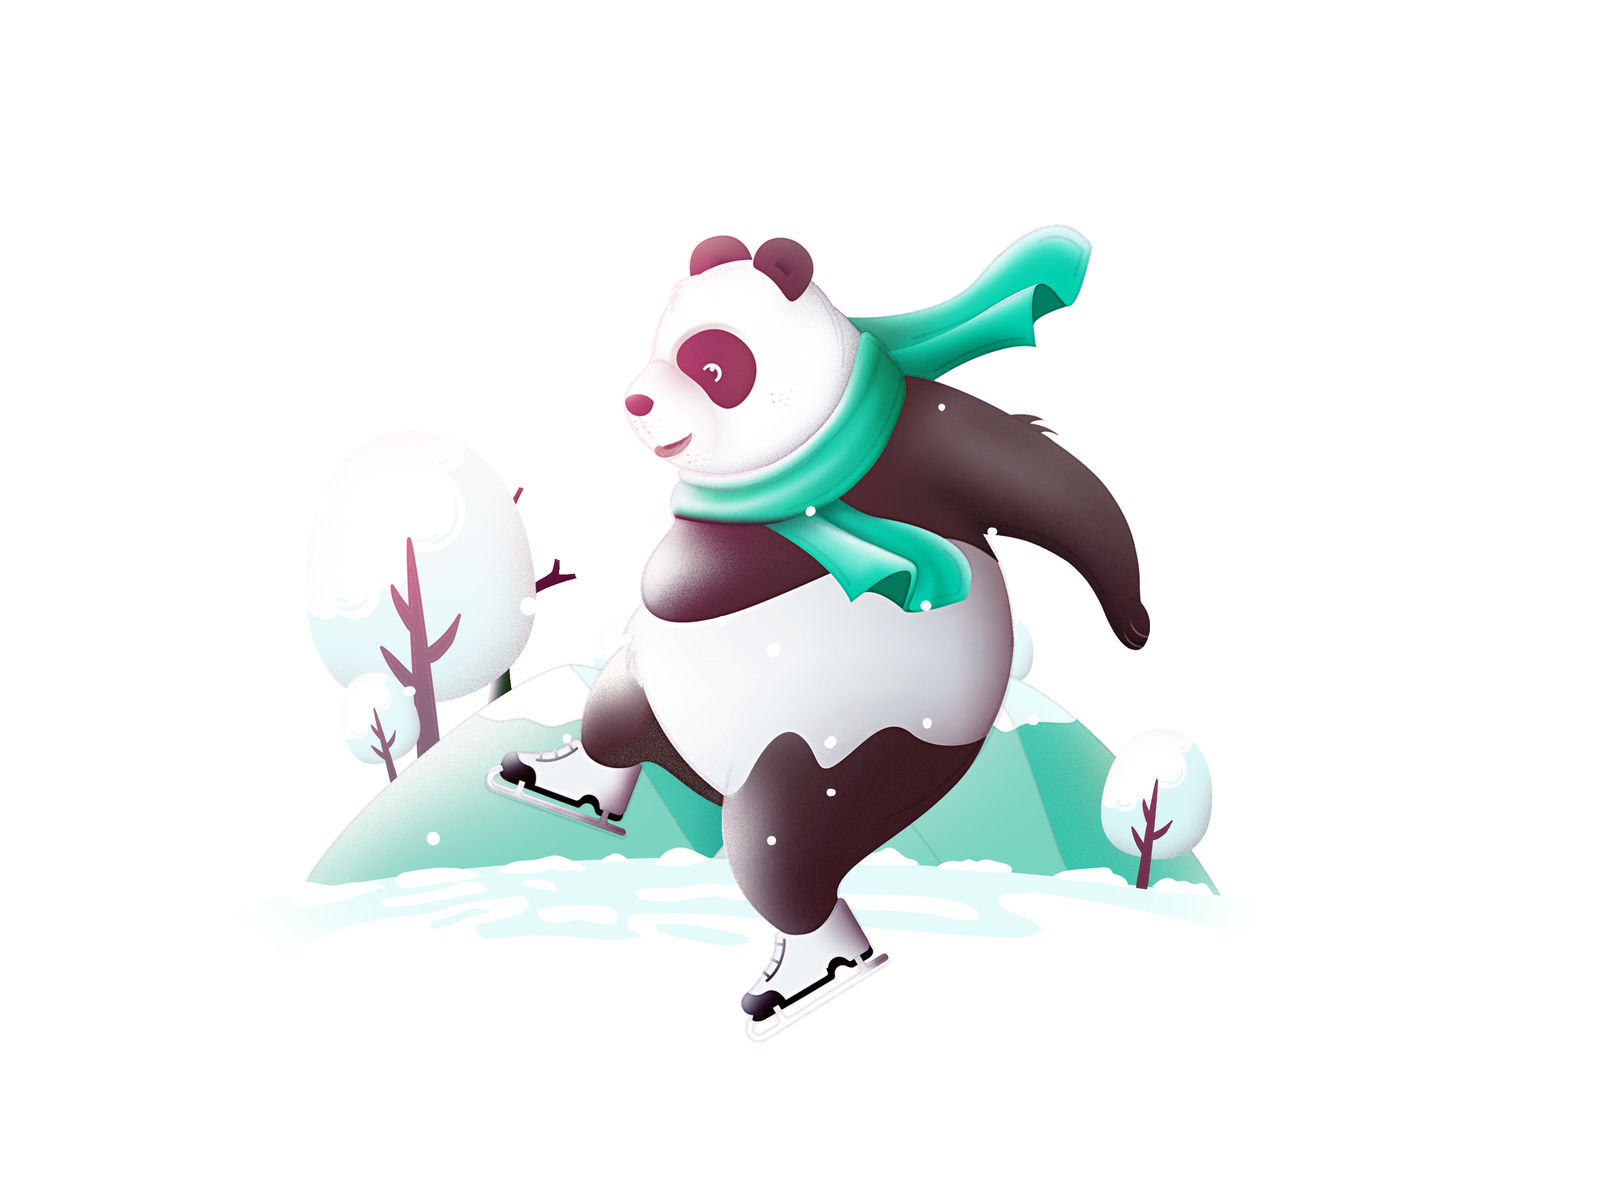 Skating Panda by Anson Poulose on Dribbble